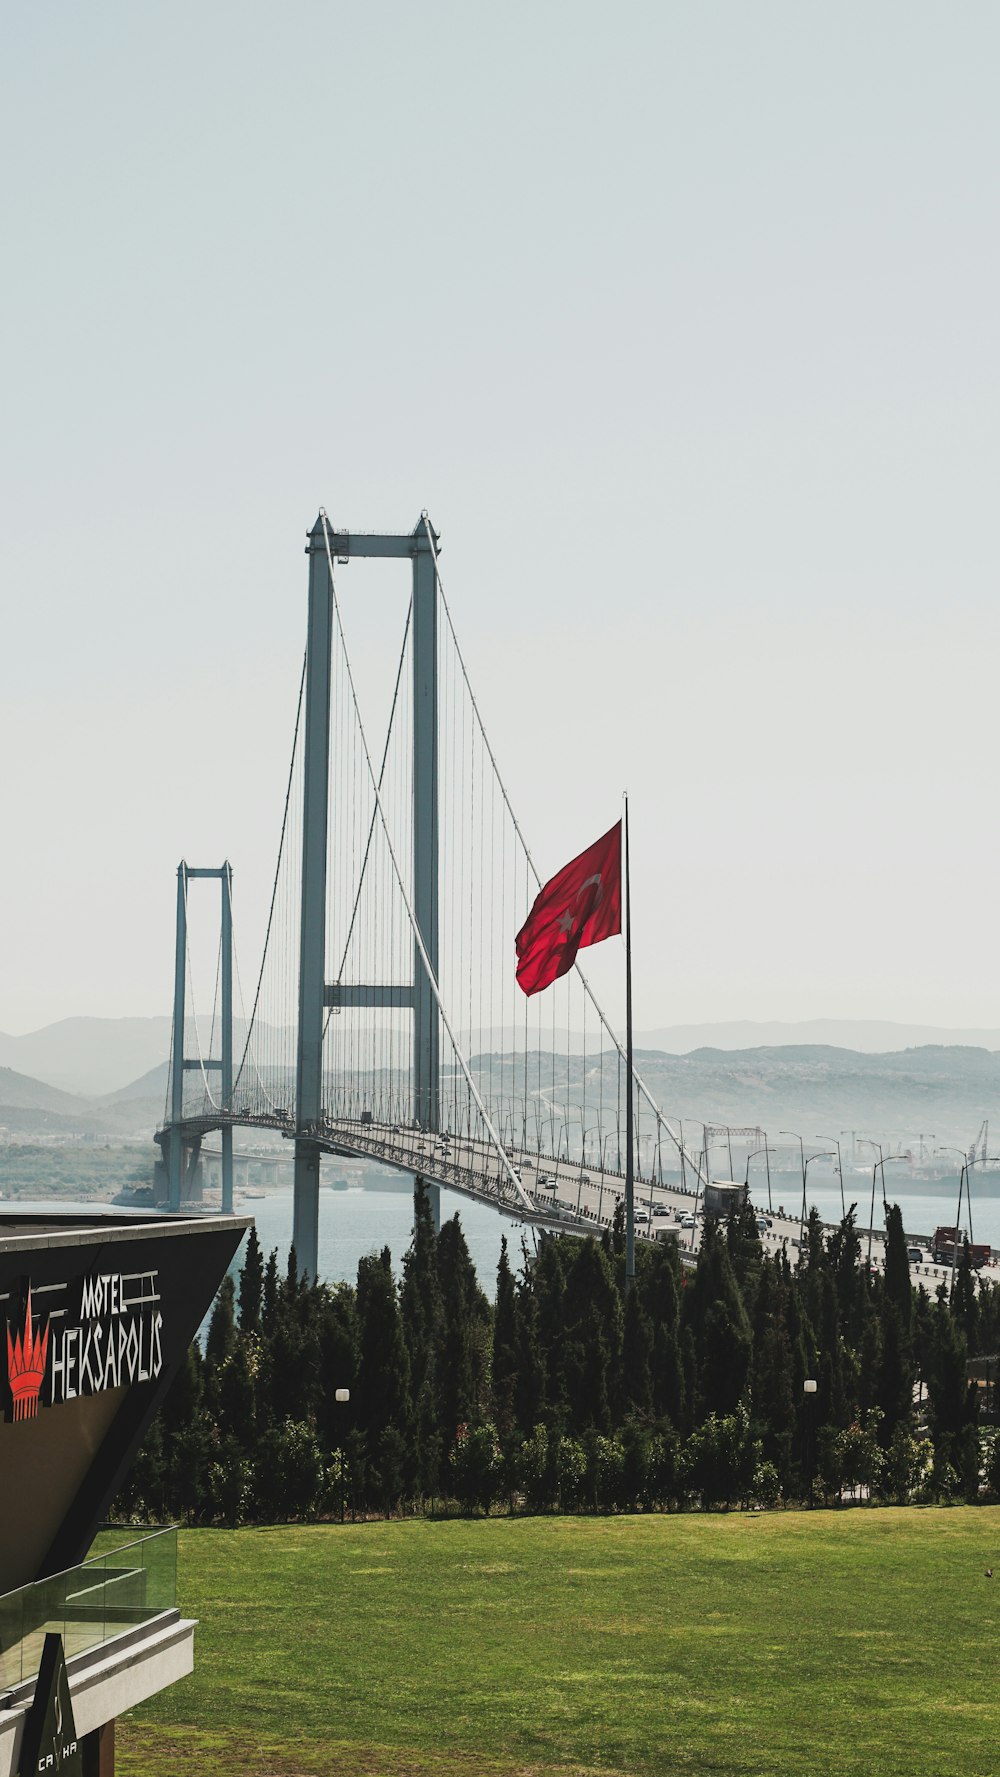 a view of a bridge with a red flag in the foreground